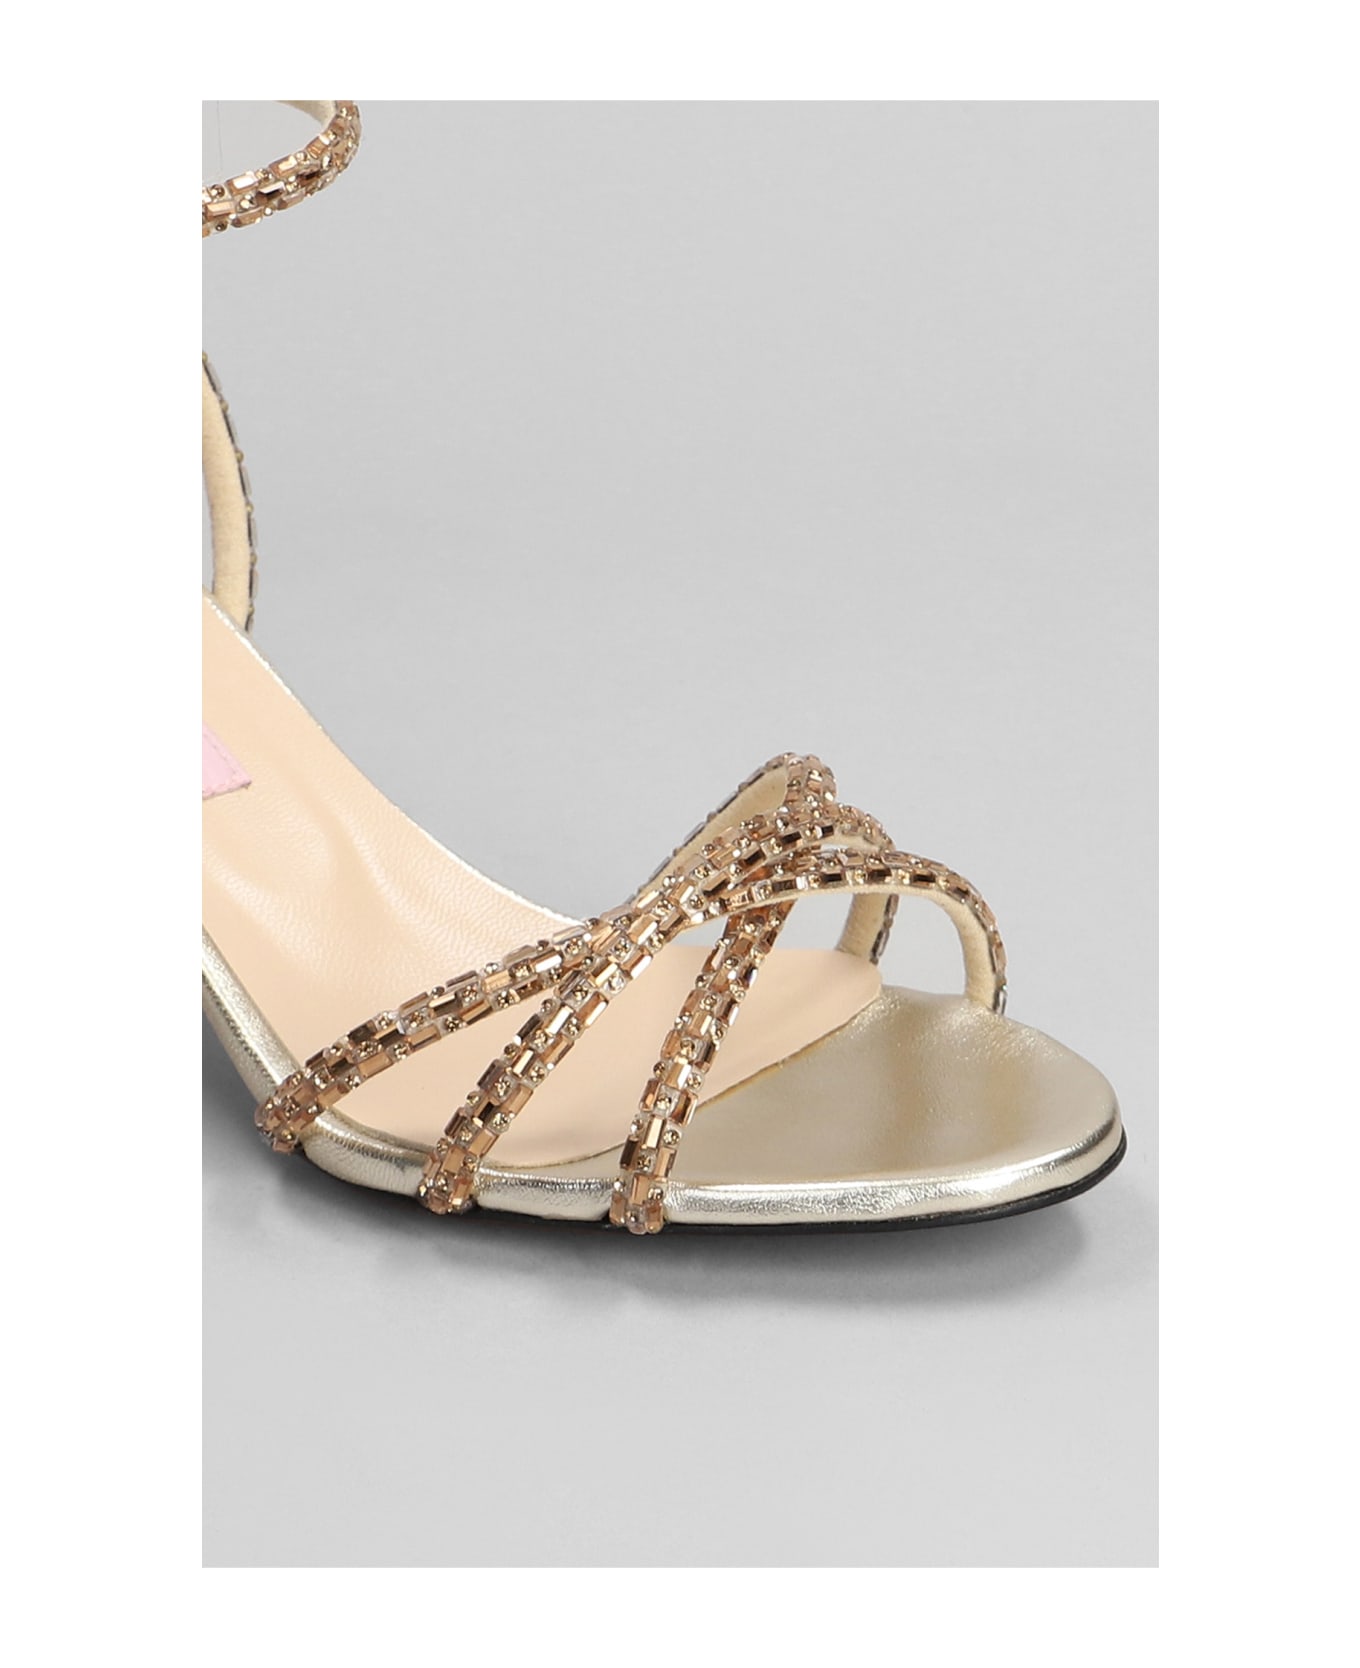 Marc Ellis Sandals In Gold Leather - gold サンダル